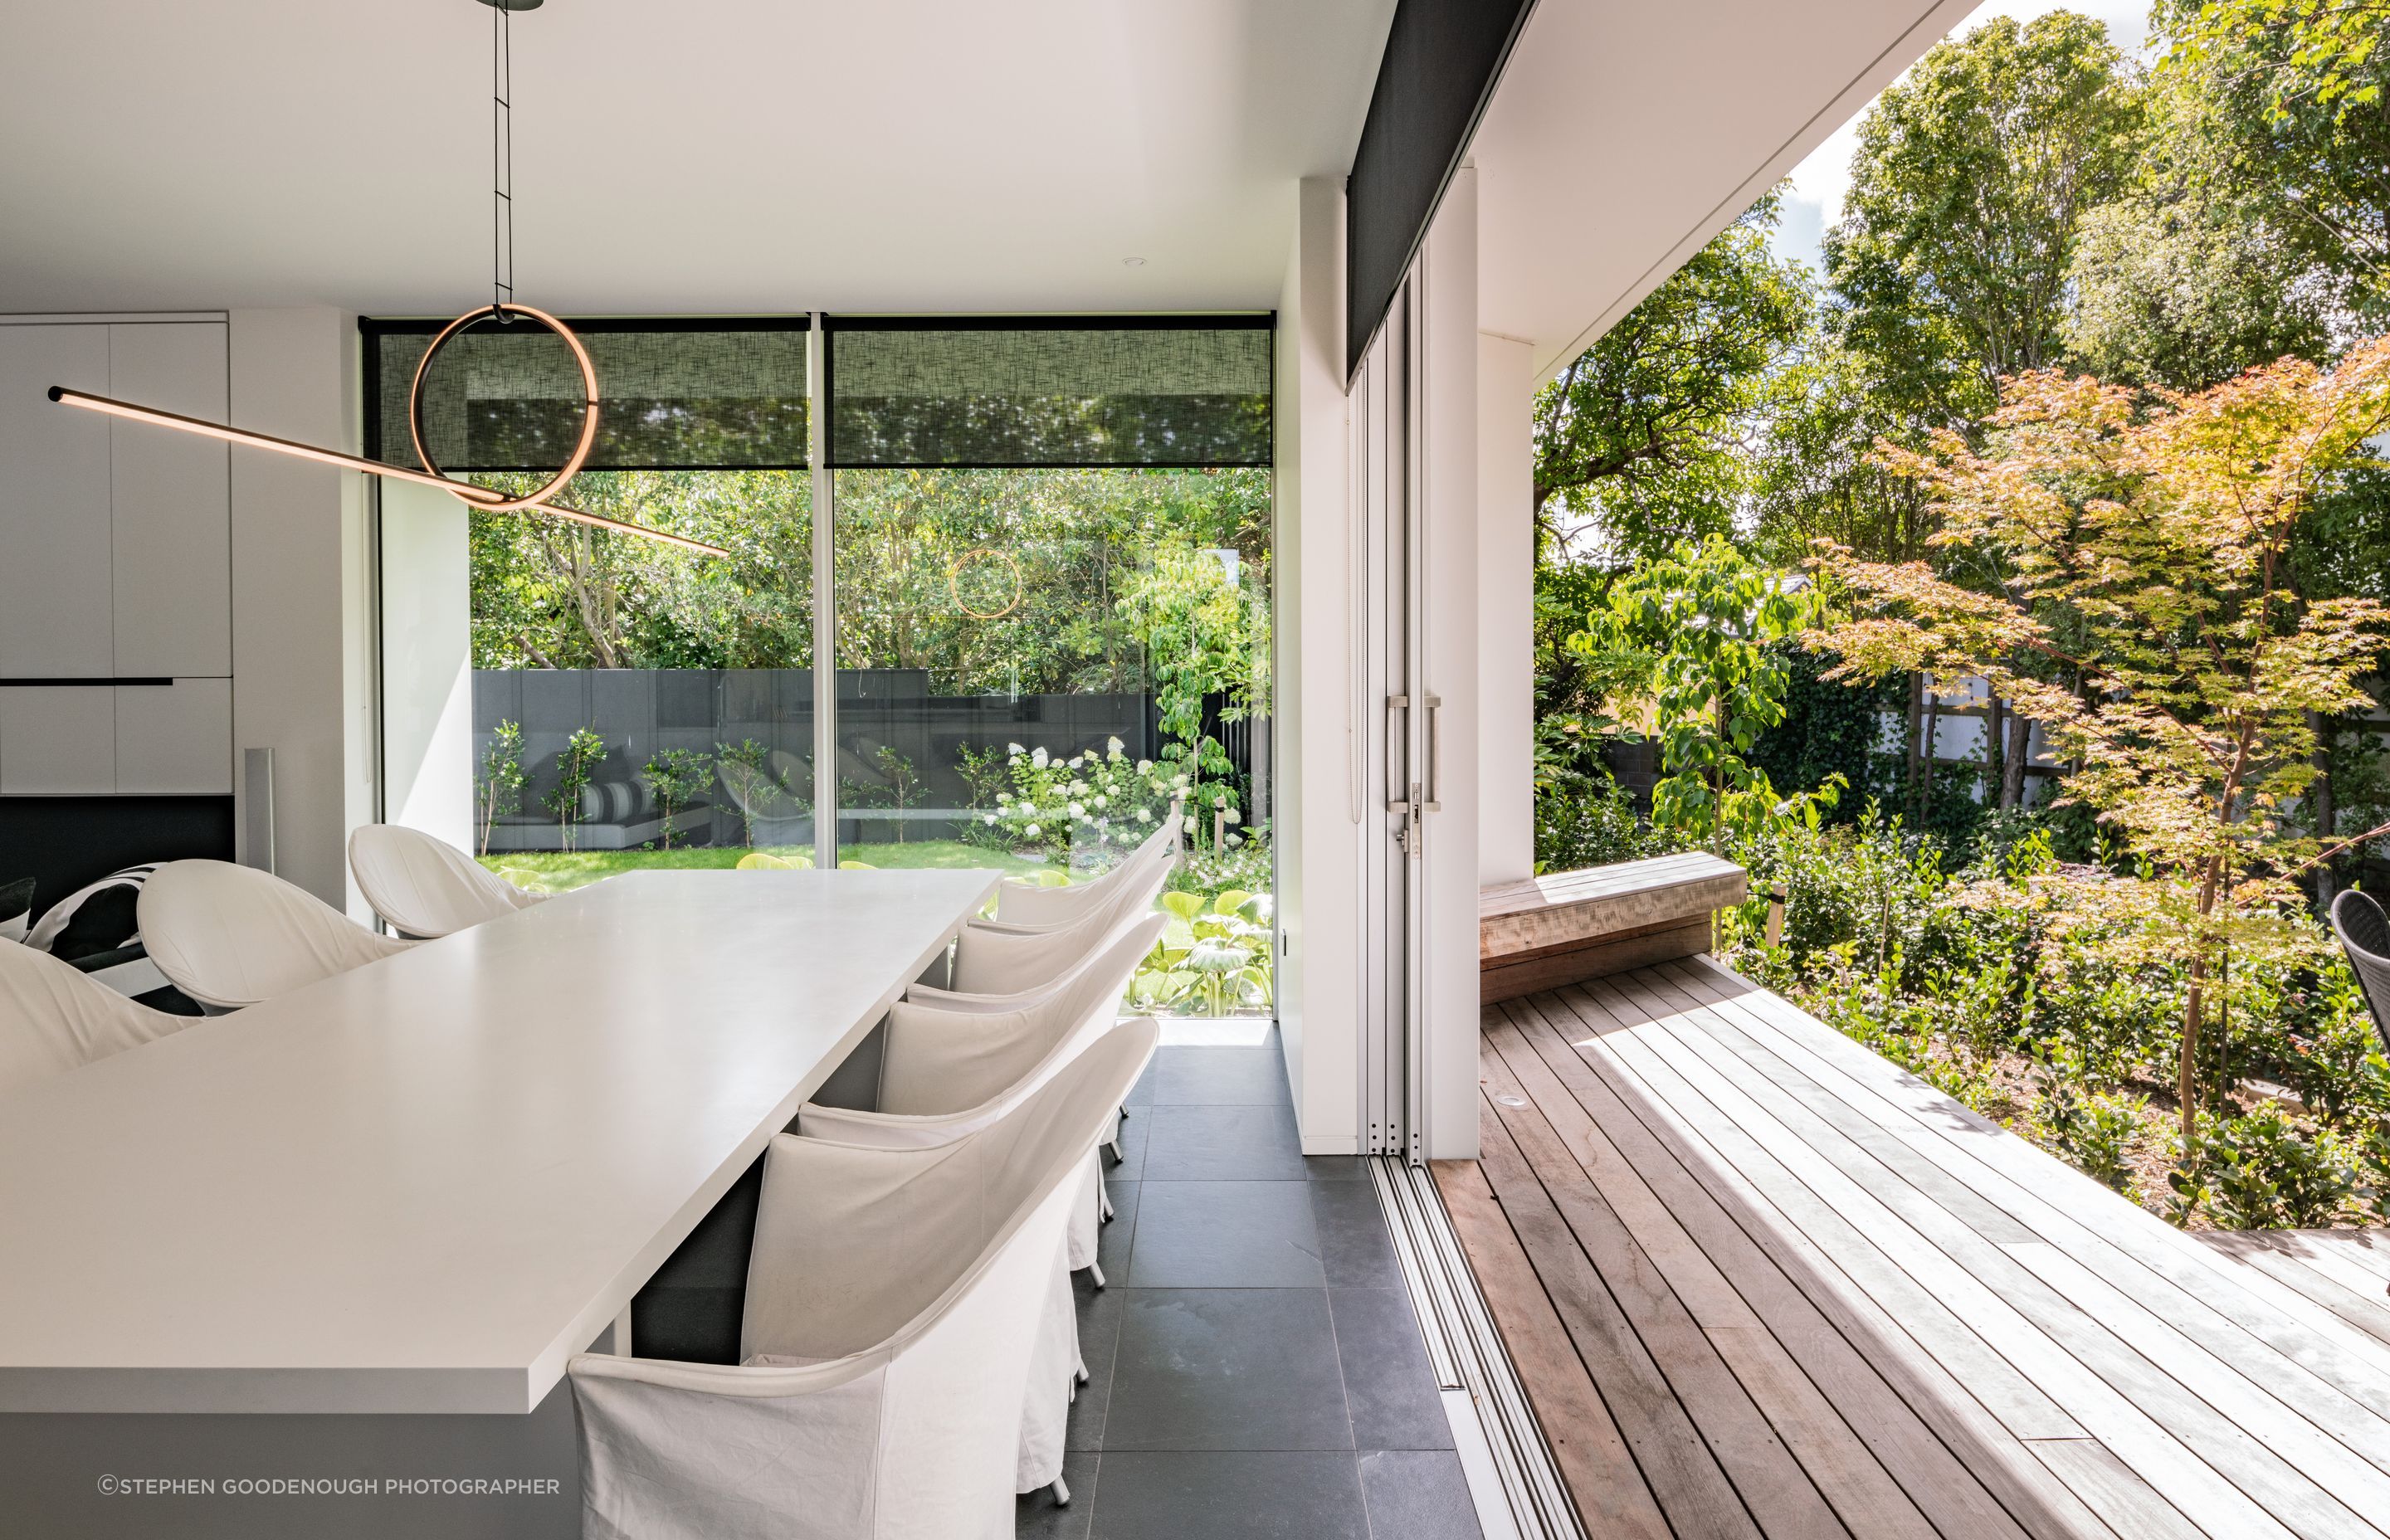 Glazing opens up so that the lush landscaping can be enjoyed from the living pavilion.